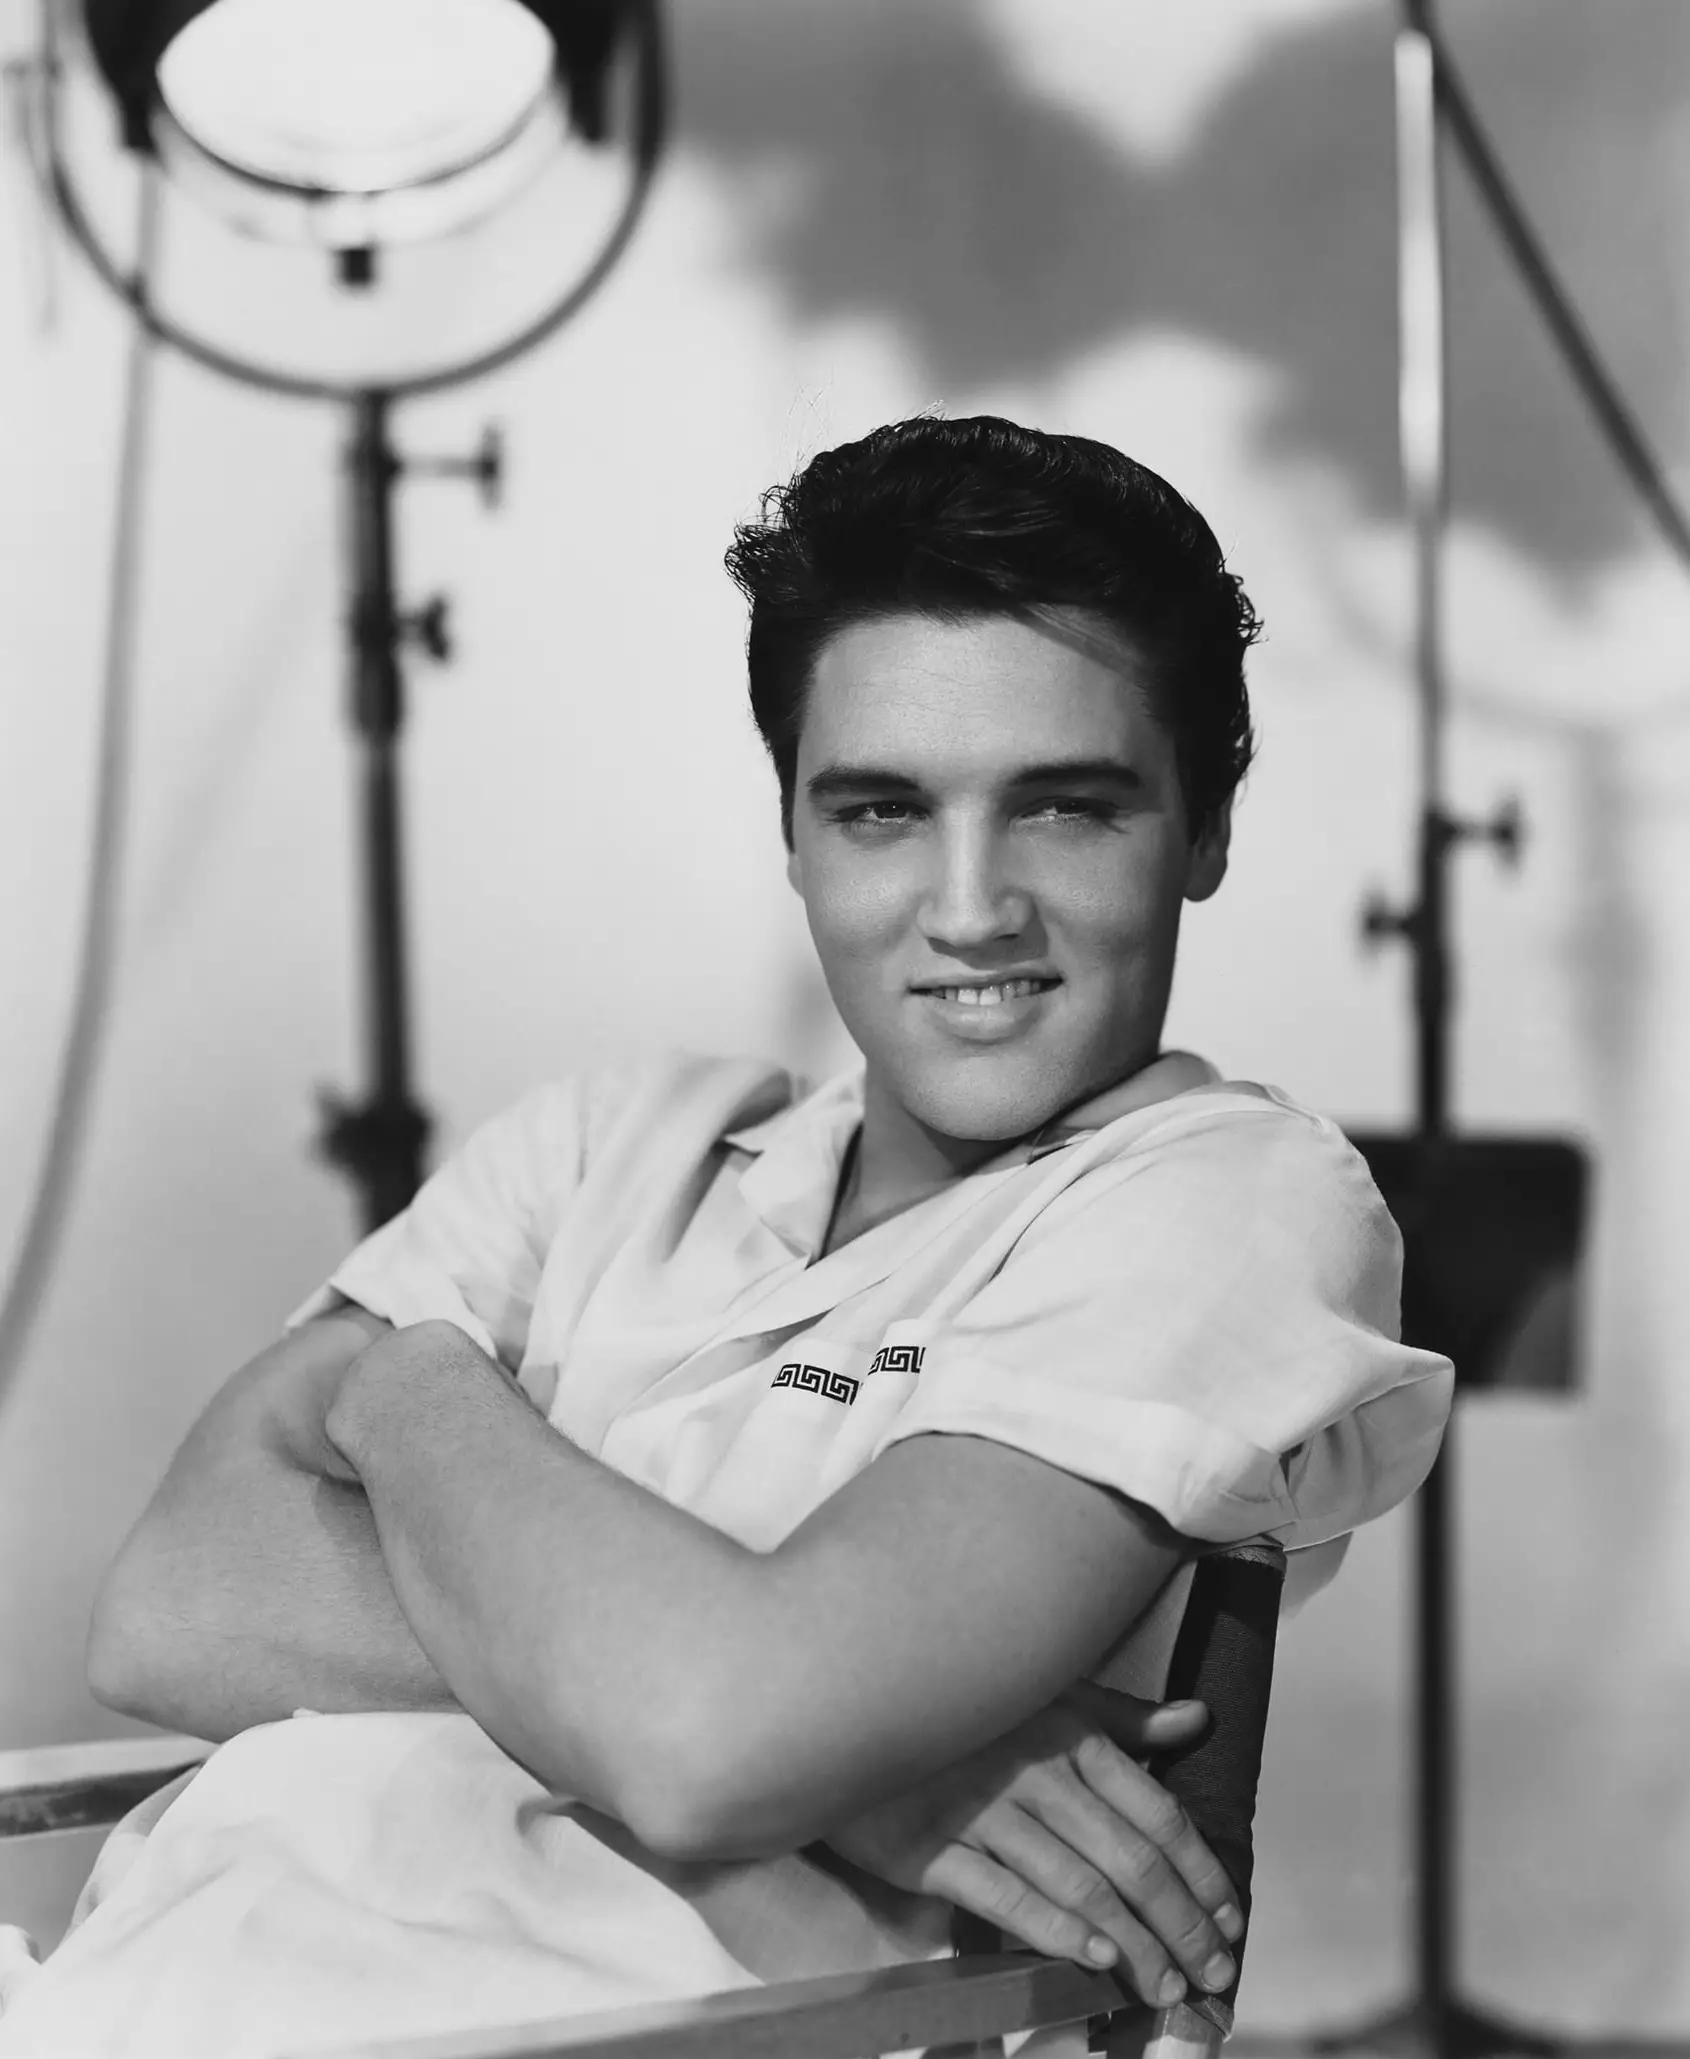 Top 10 Elvis Biographical Movies You Need to Watch